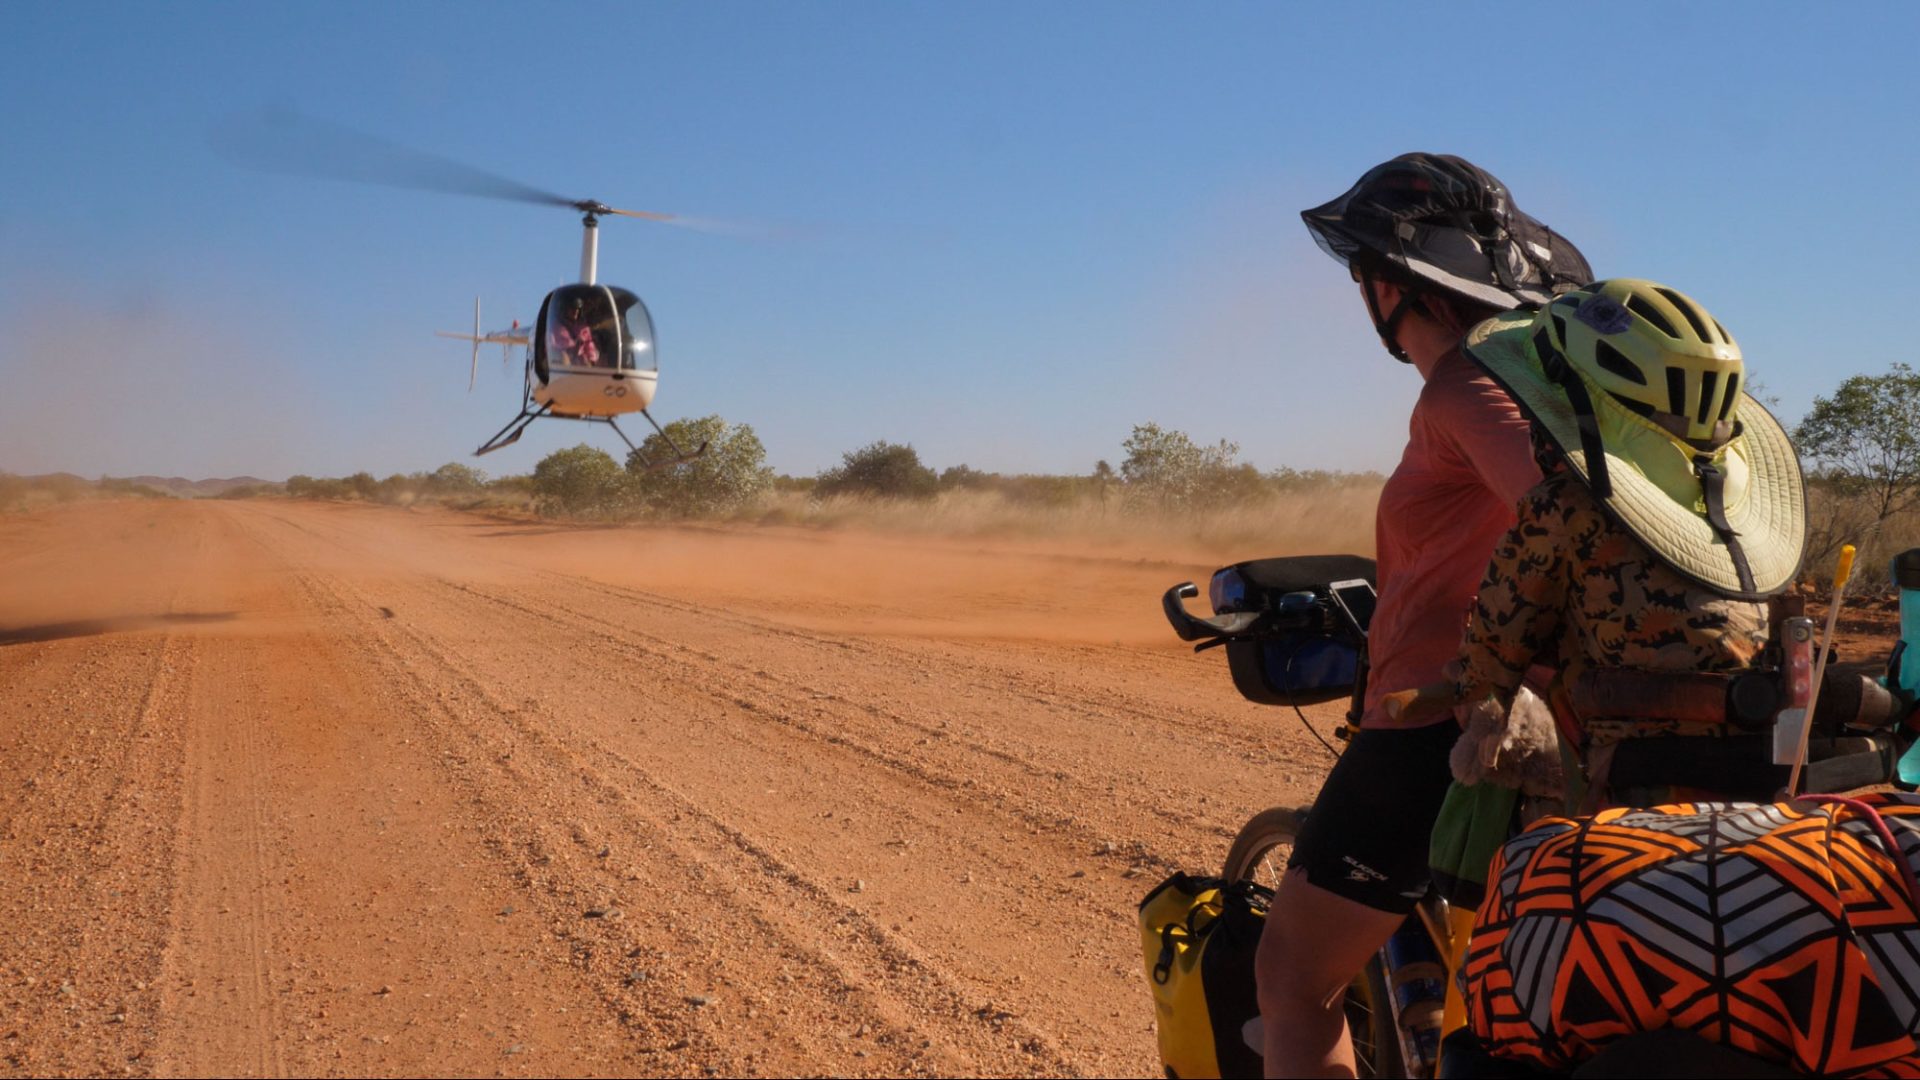 Wilfy and Nicola look at a small helicopter coming in to land on a red dirt road. 